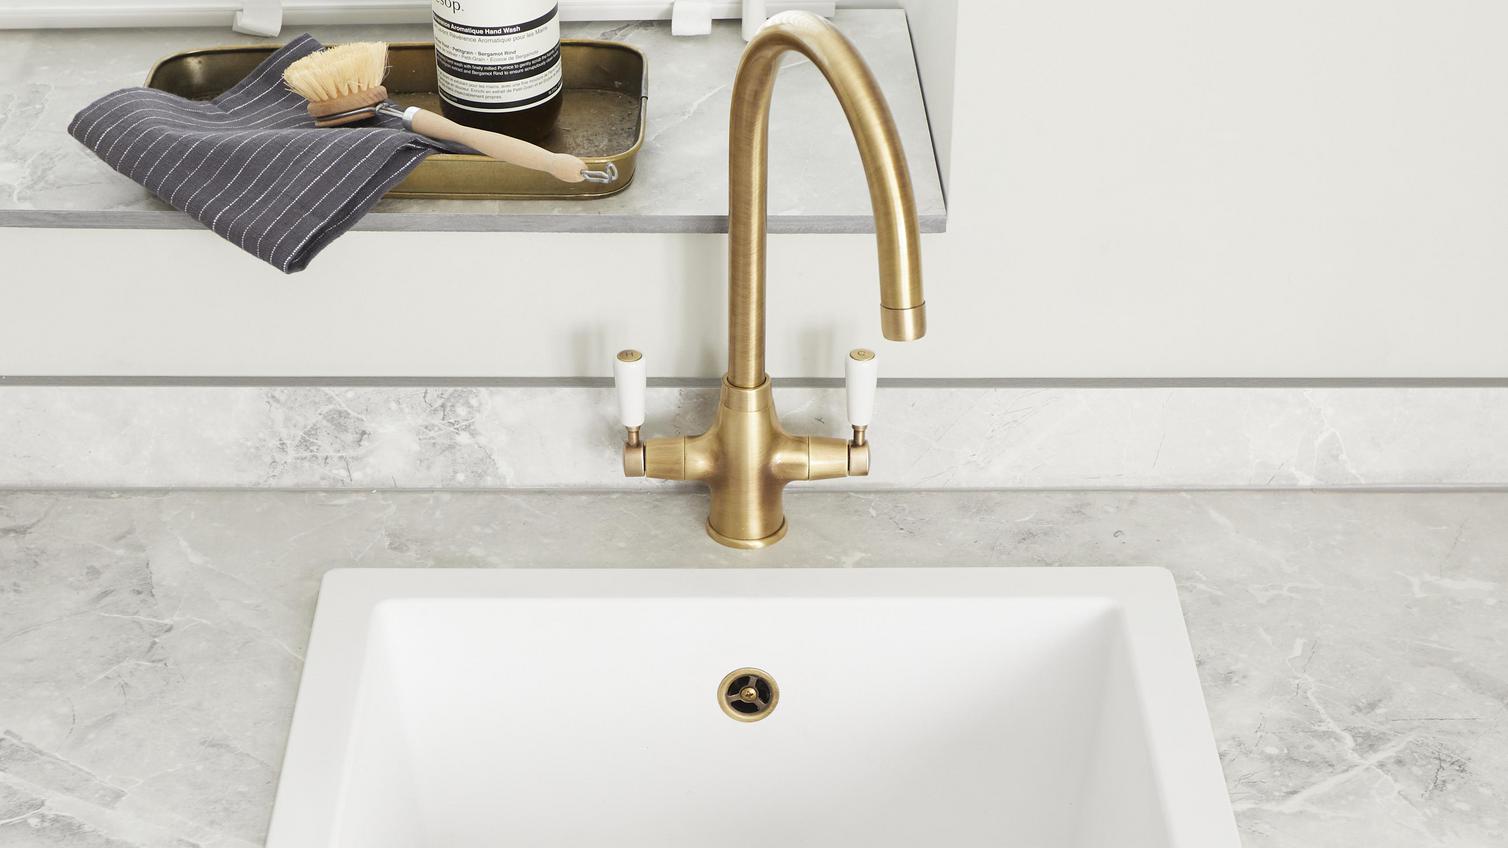 A classic-style brass tap and matching strainer in a white inset sink. The tap features two-lever control and a curved spout.